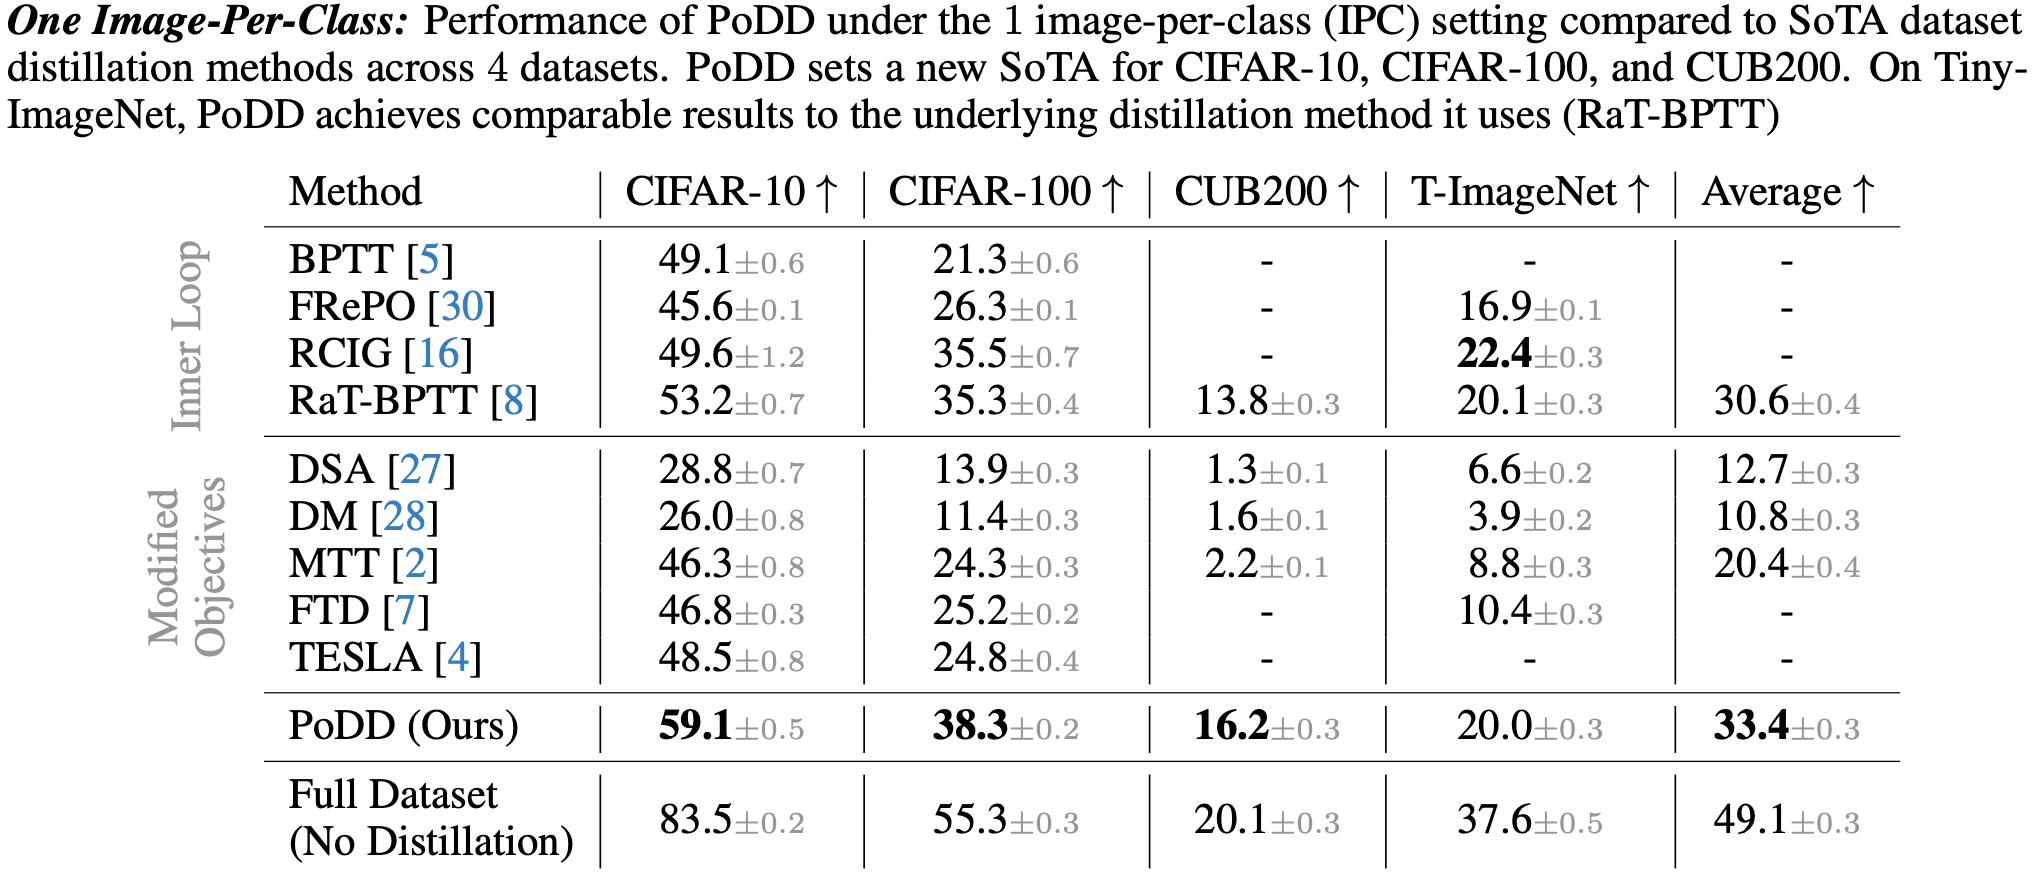 Results of 1 Image-Per-Class